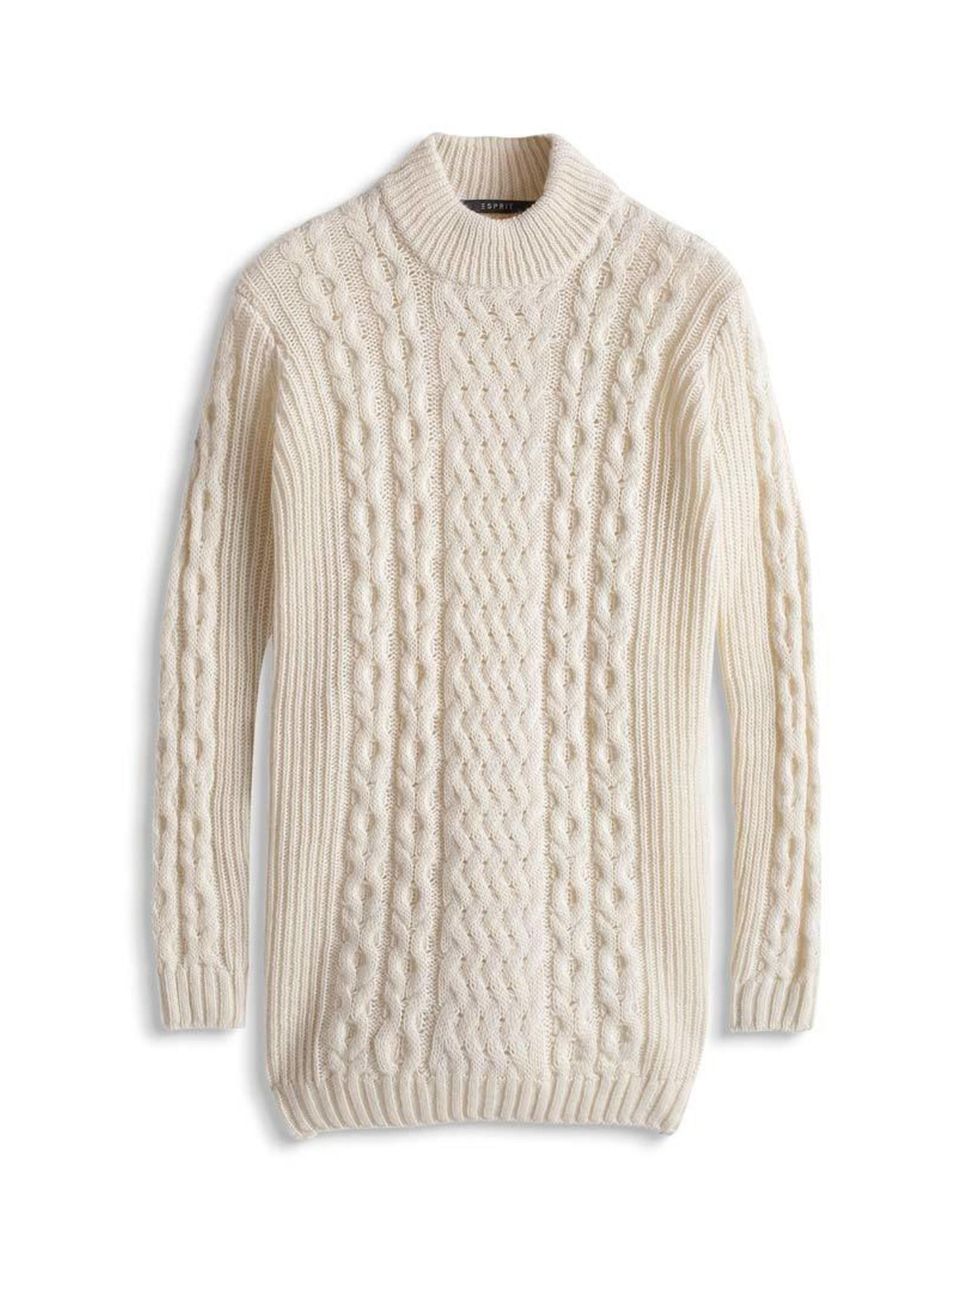 <p>Editorial Assistant Gillian Brett will layer this chunky knit over black leather trousers.</p>

<p> </p>

<p><a href="http://www.esprit.co.uk/womenswear/jumpers-cardigans/jumpers-plain/soft-chunky-knit-cable-sweater-alpaca-094EO1I039_103#!ThumbFlat" ta